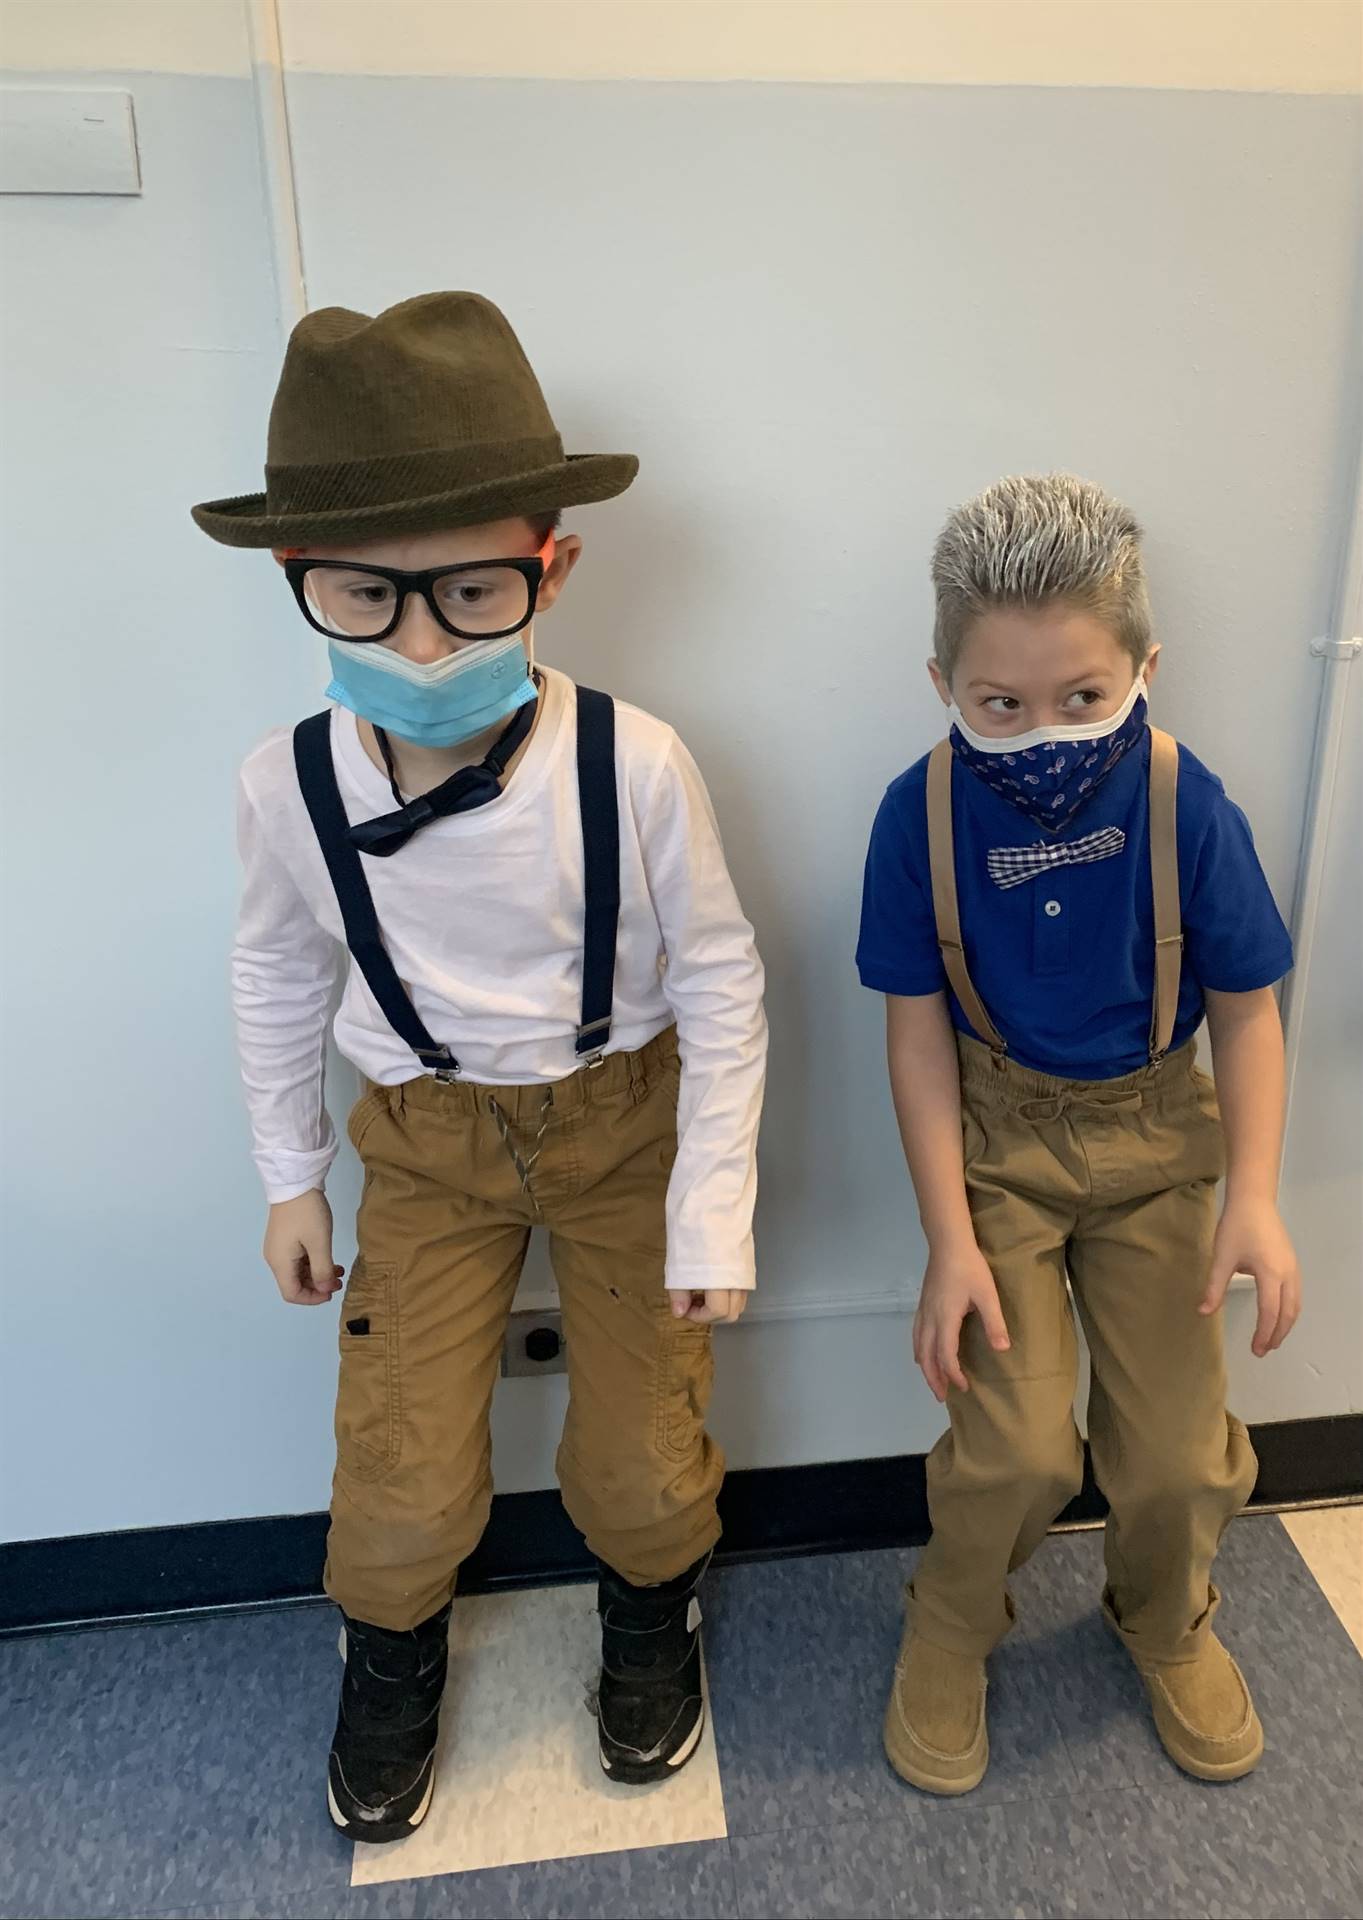 2 boys with suspenders and a hat